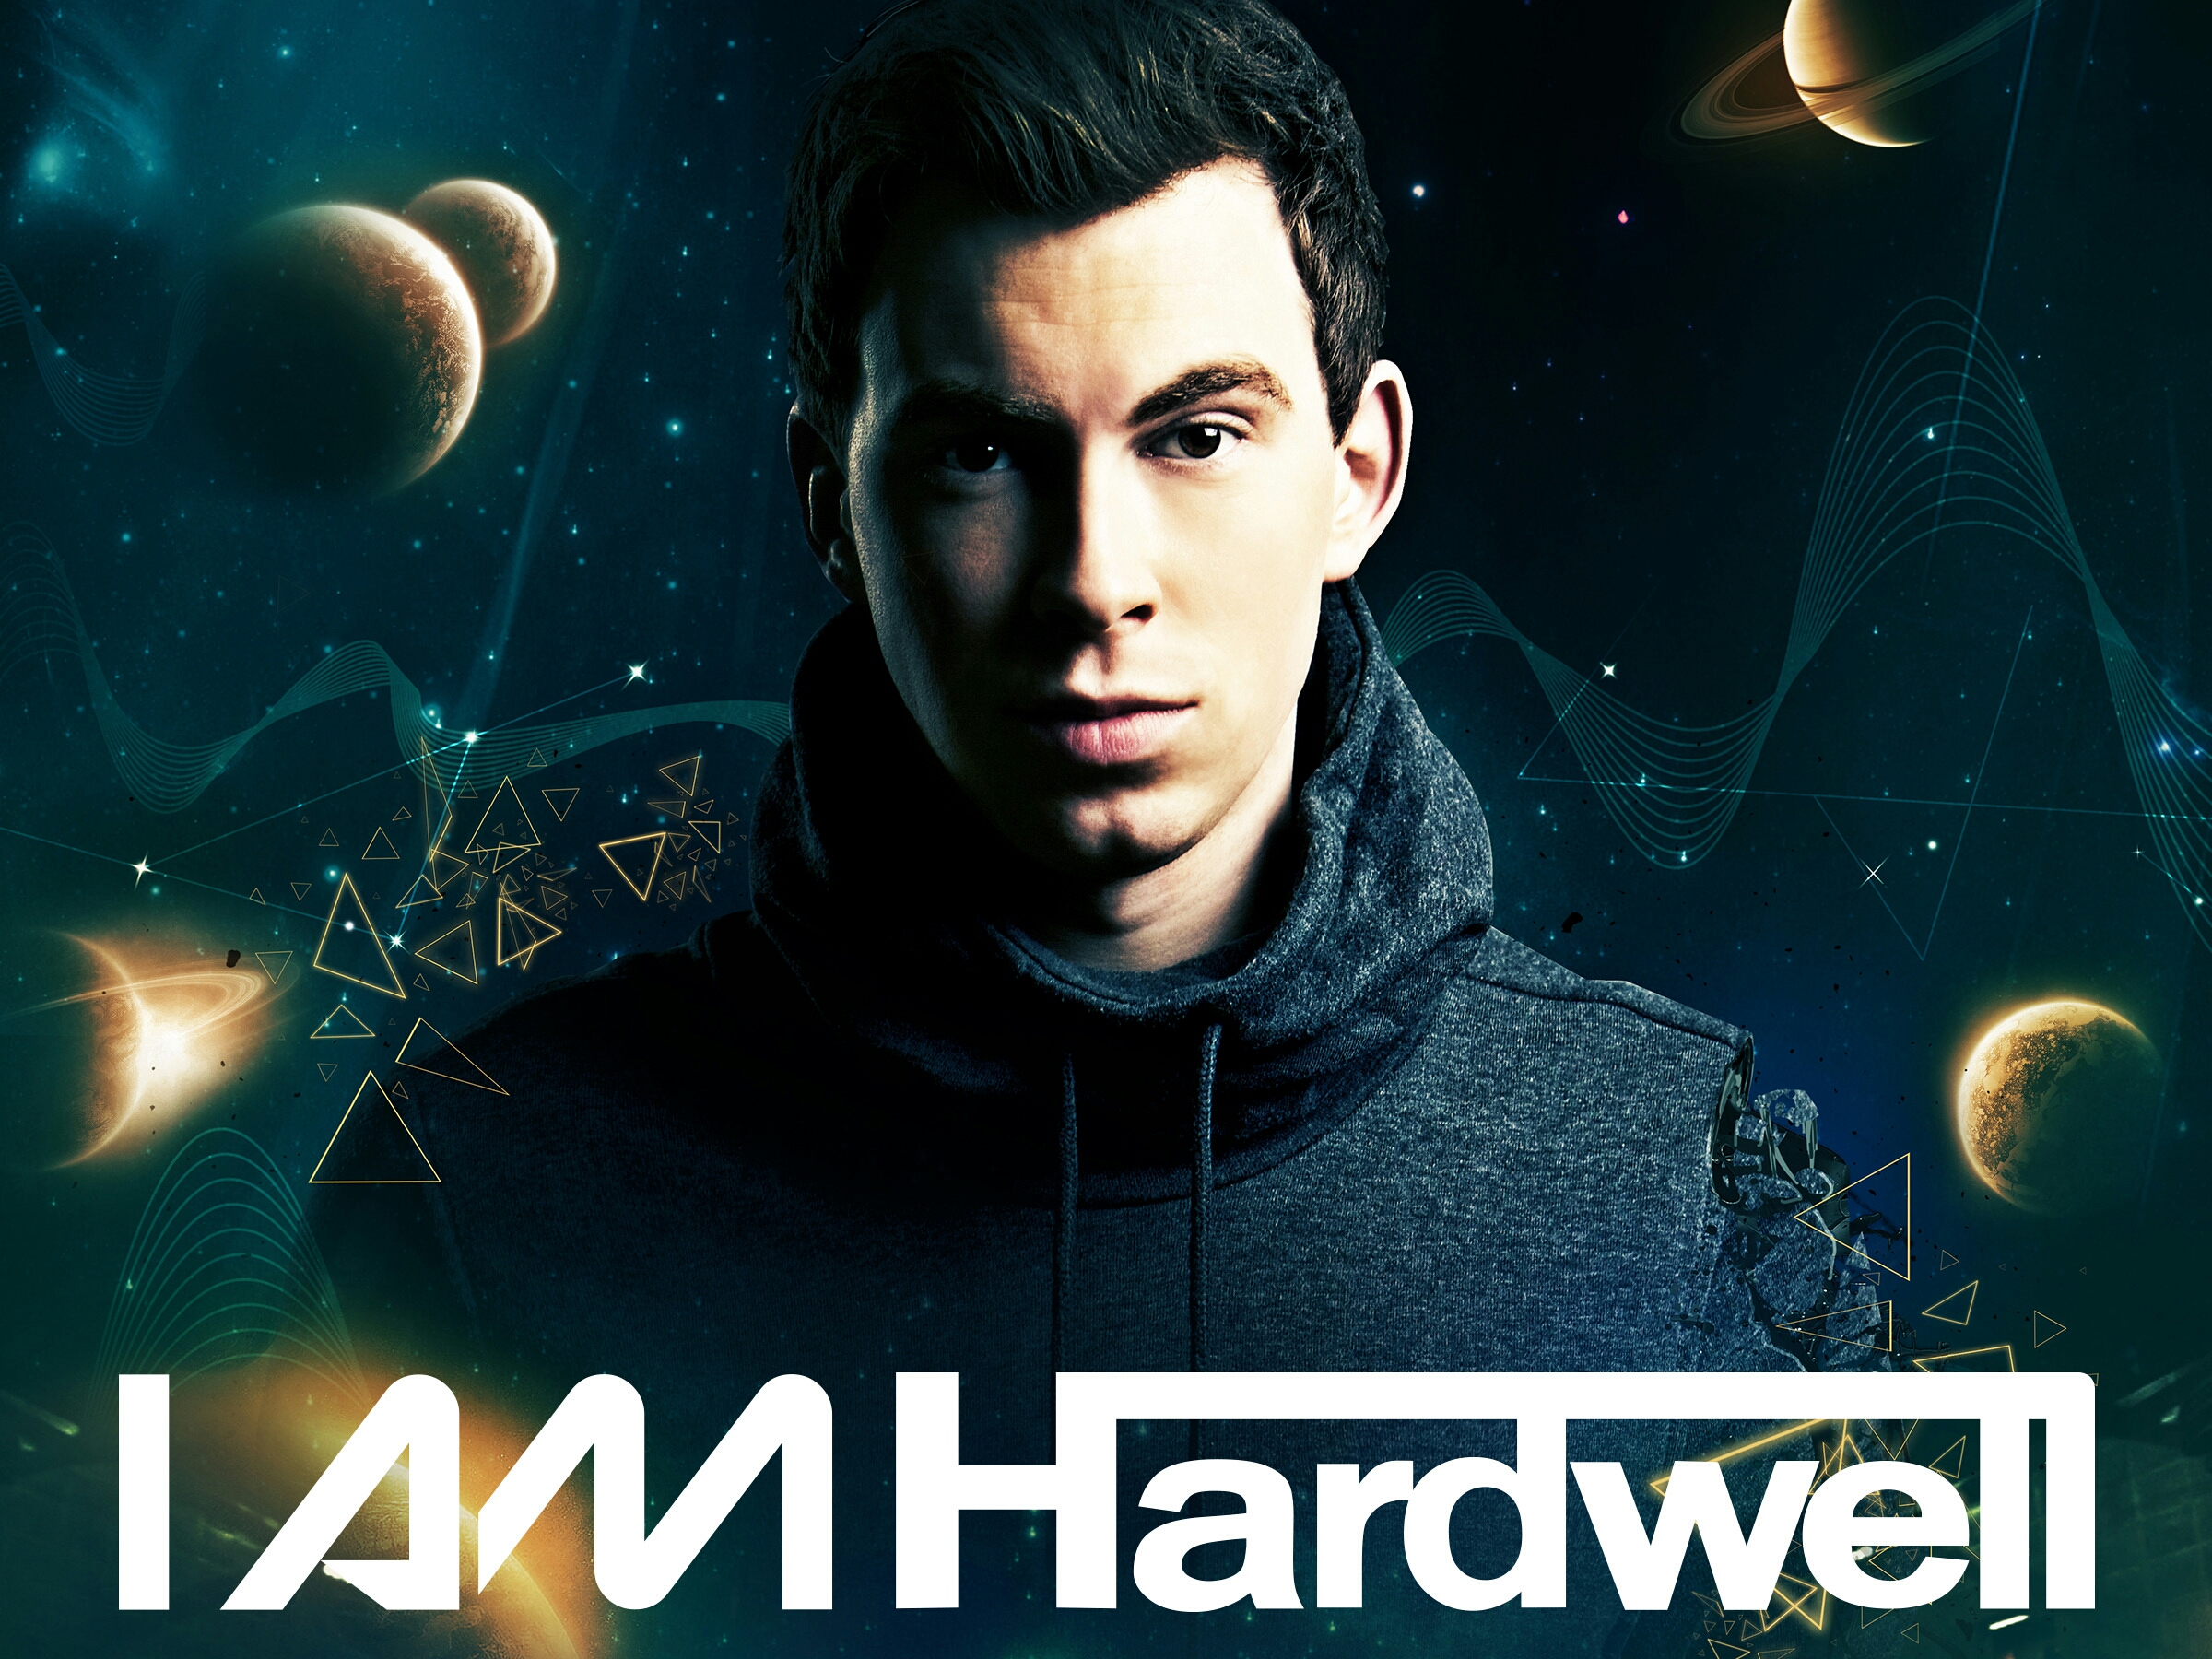 hardwell wallpaper,cool,forehead,space,movie,font